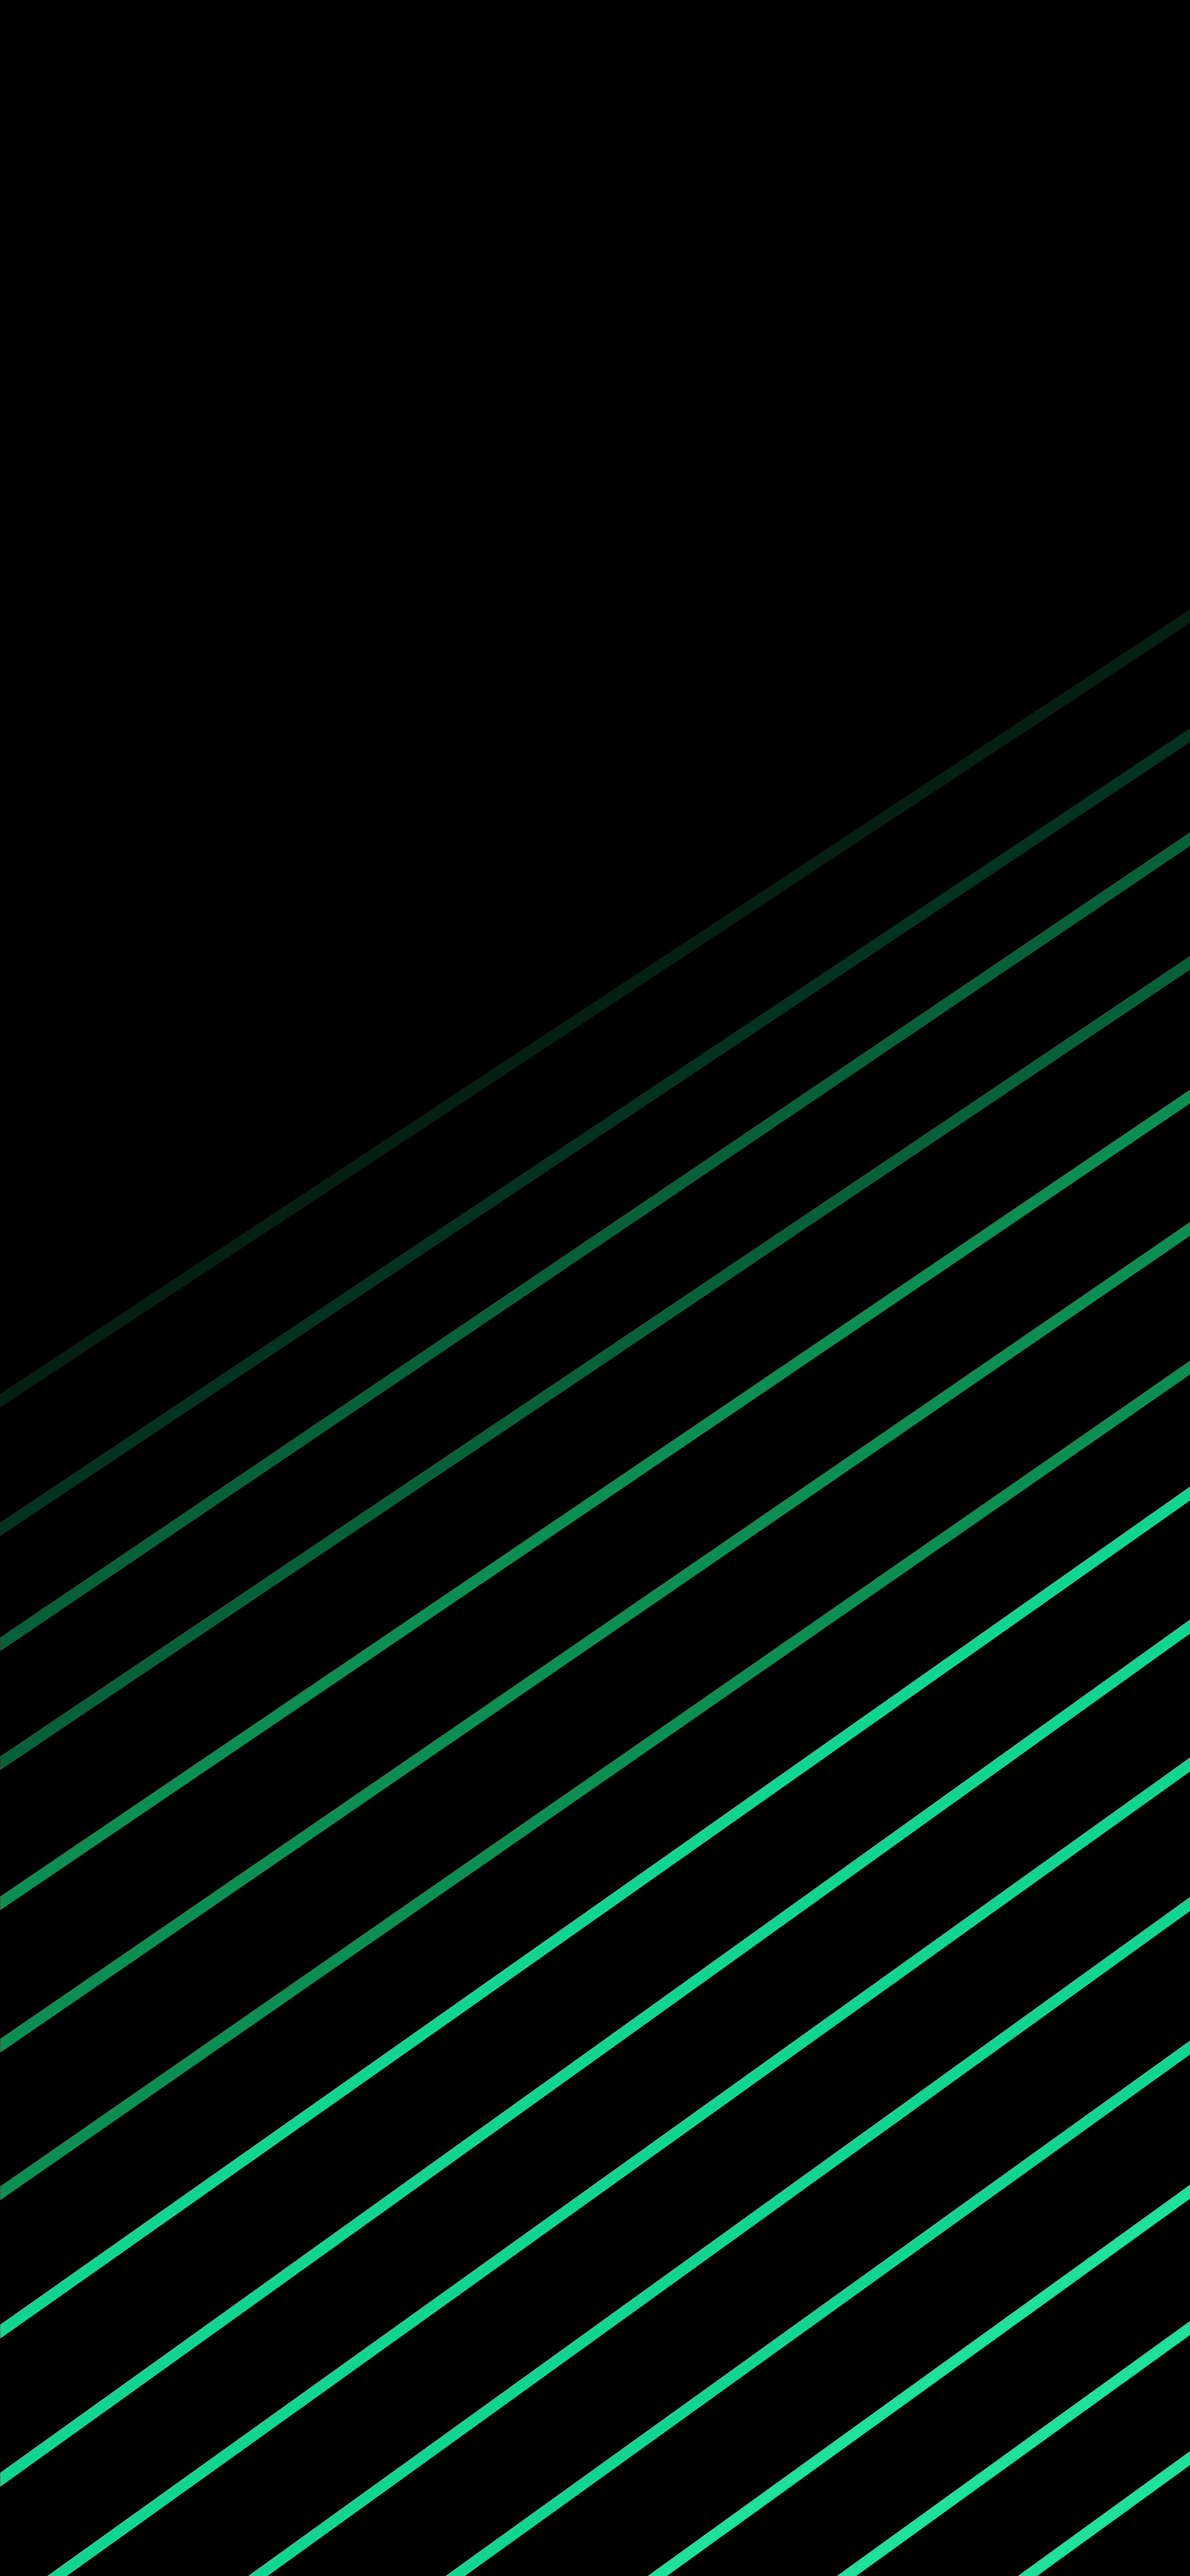 iOS 13 Waves  Green Dark  Wallpapers Central  Iphone wallpaper hd  original Iphone wallpaper landscape Color wallpaper iphone